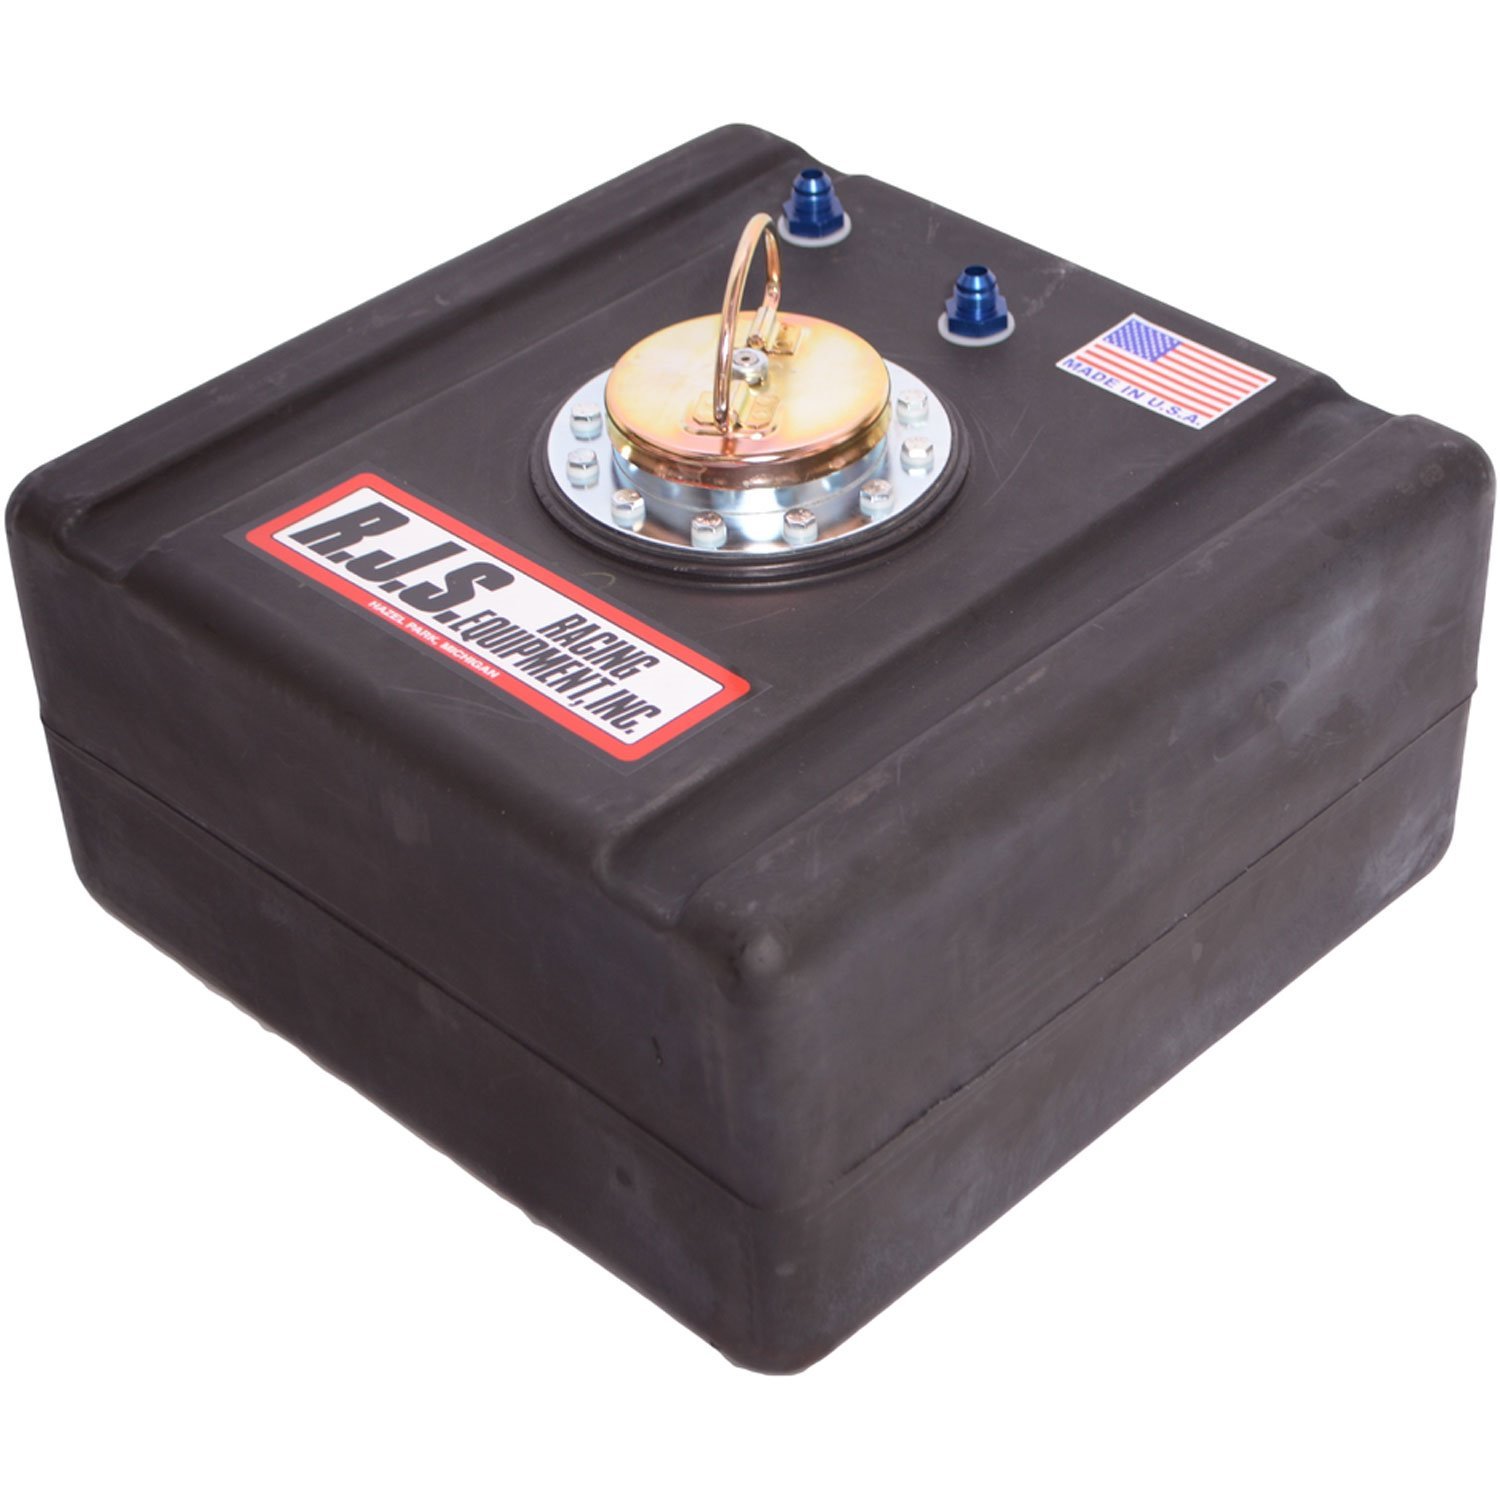 11 Gallon Economy Fuel Cell with Aircraft Style Filler Cap